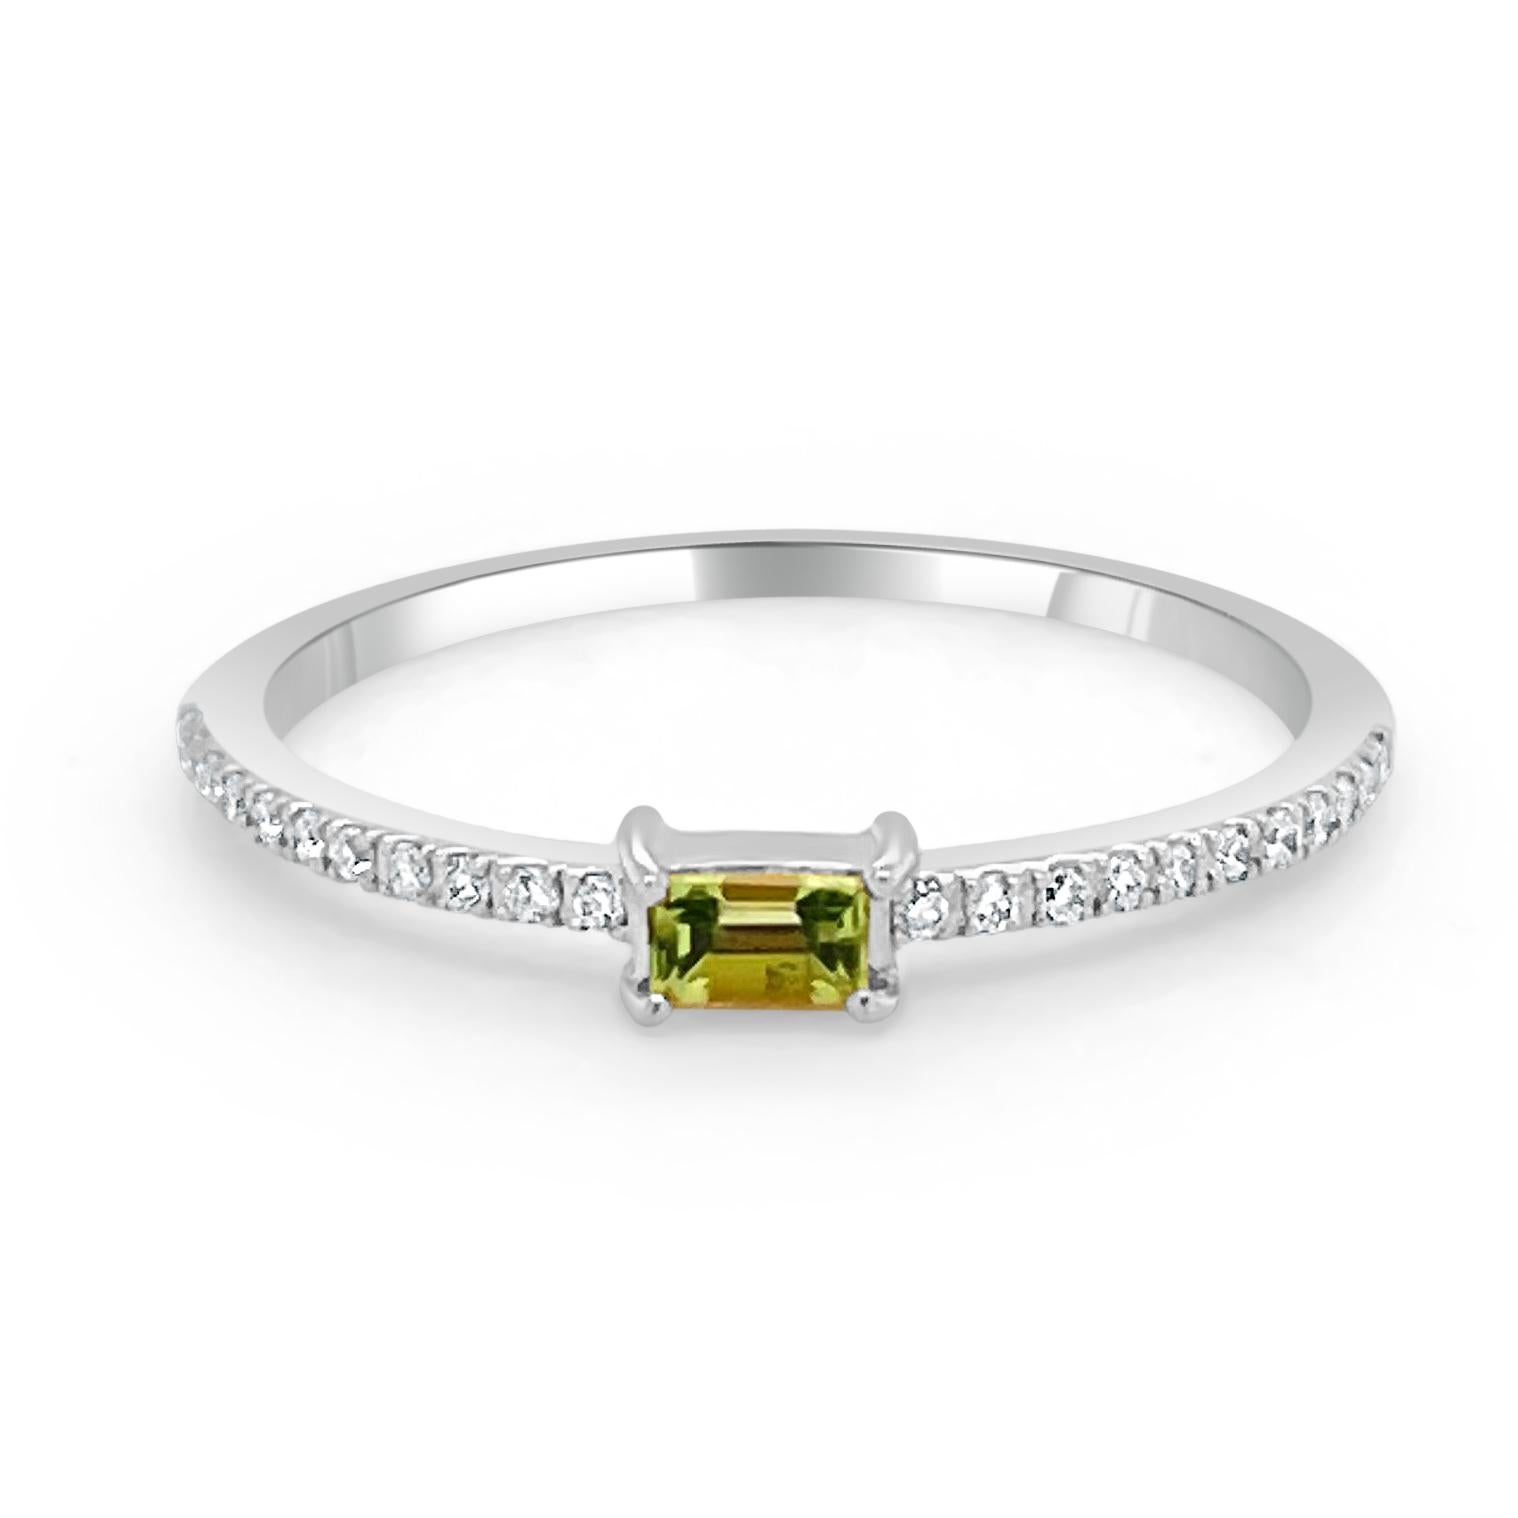 Charming and Elusive Design - This stackable ring features a 14k gold band, a baguette shaped gorgeous peridot approximately 0.16 ct, and round diamonds approximately 0.09 ct. 
Measurements for ring size: The finger Size of the ring is 6.5 and your